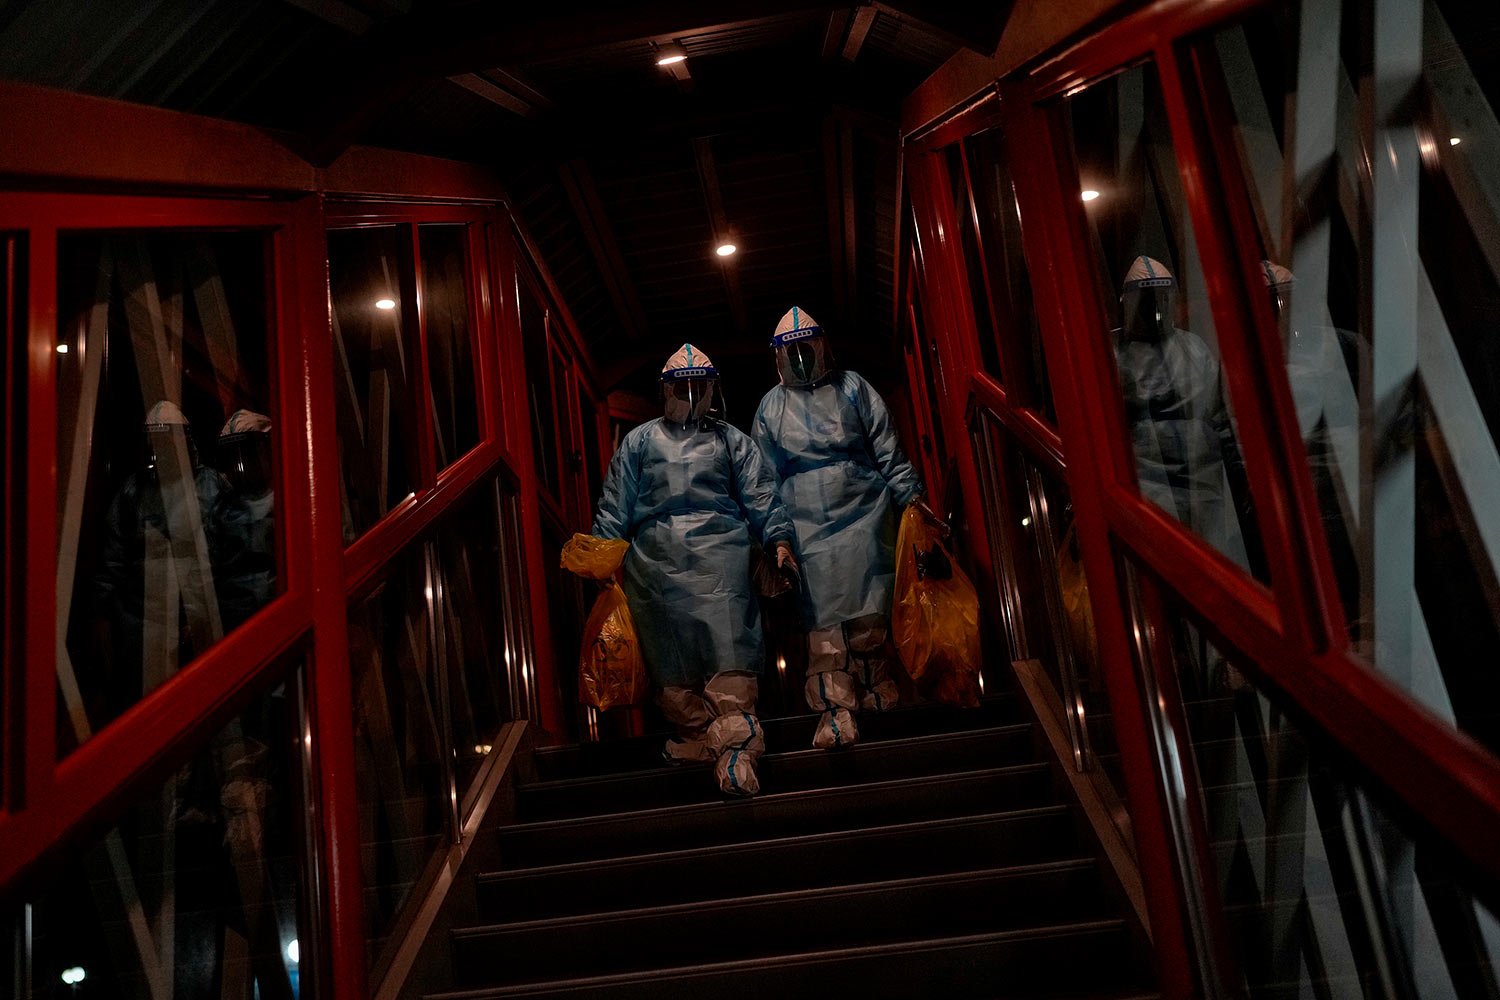  Health workers wearing protective suits carry COVID-19 test samples as they walk through a passageway at a hotel inside the Olympic bubble during the 2022 Winter Paralympics, Monday, March 7, 2022, in the Yanqing district of Beijing.  (AP Photo/Andy